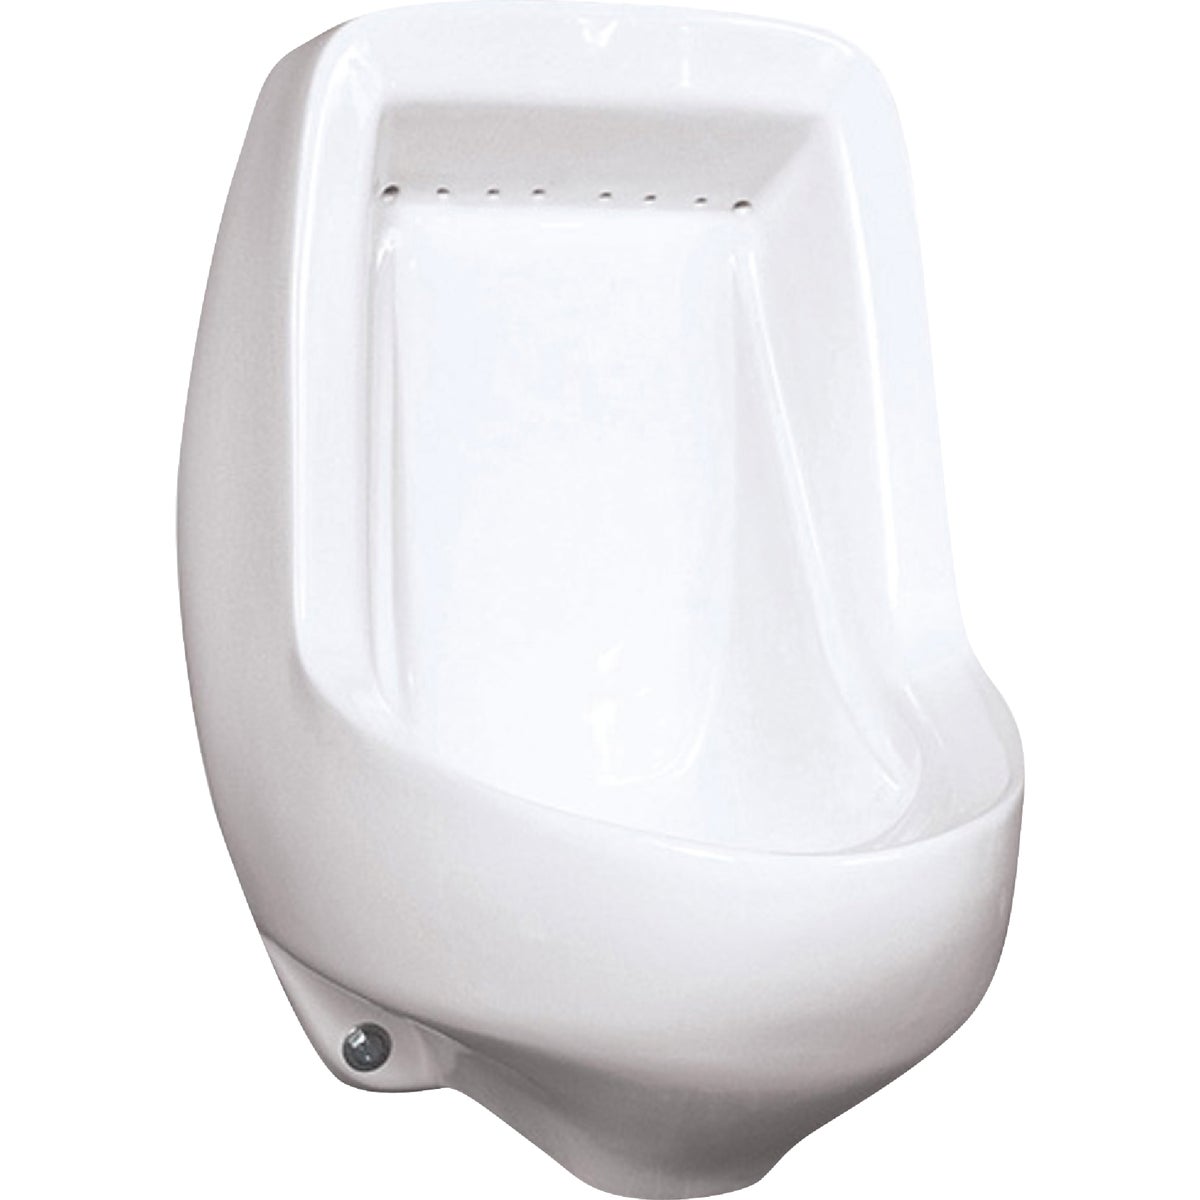 Item 401882, High Efficiency wall hung urinal uses only 0.